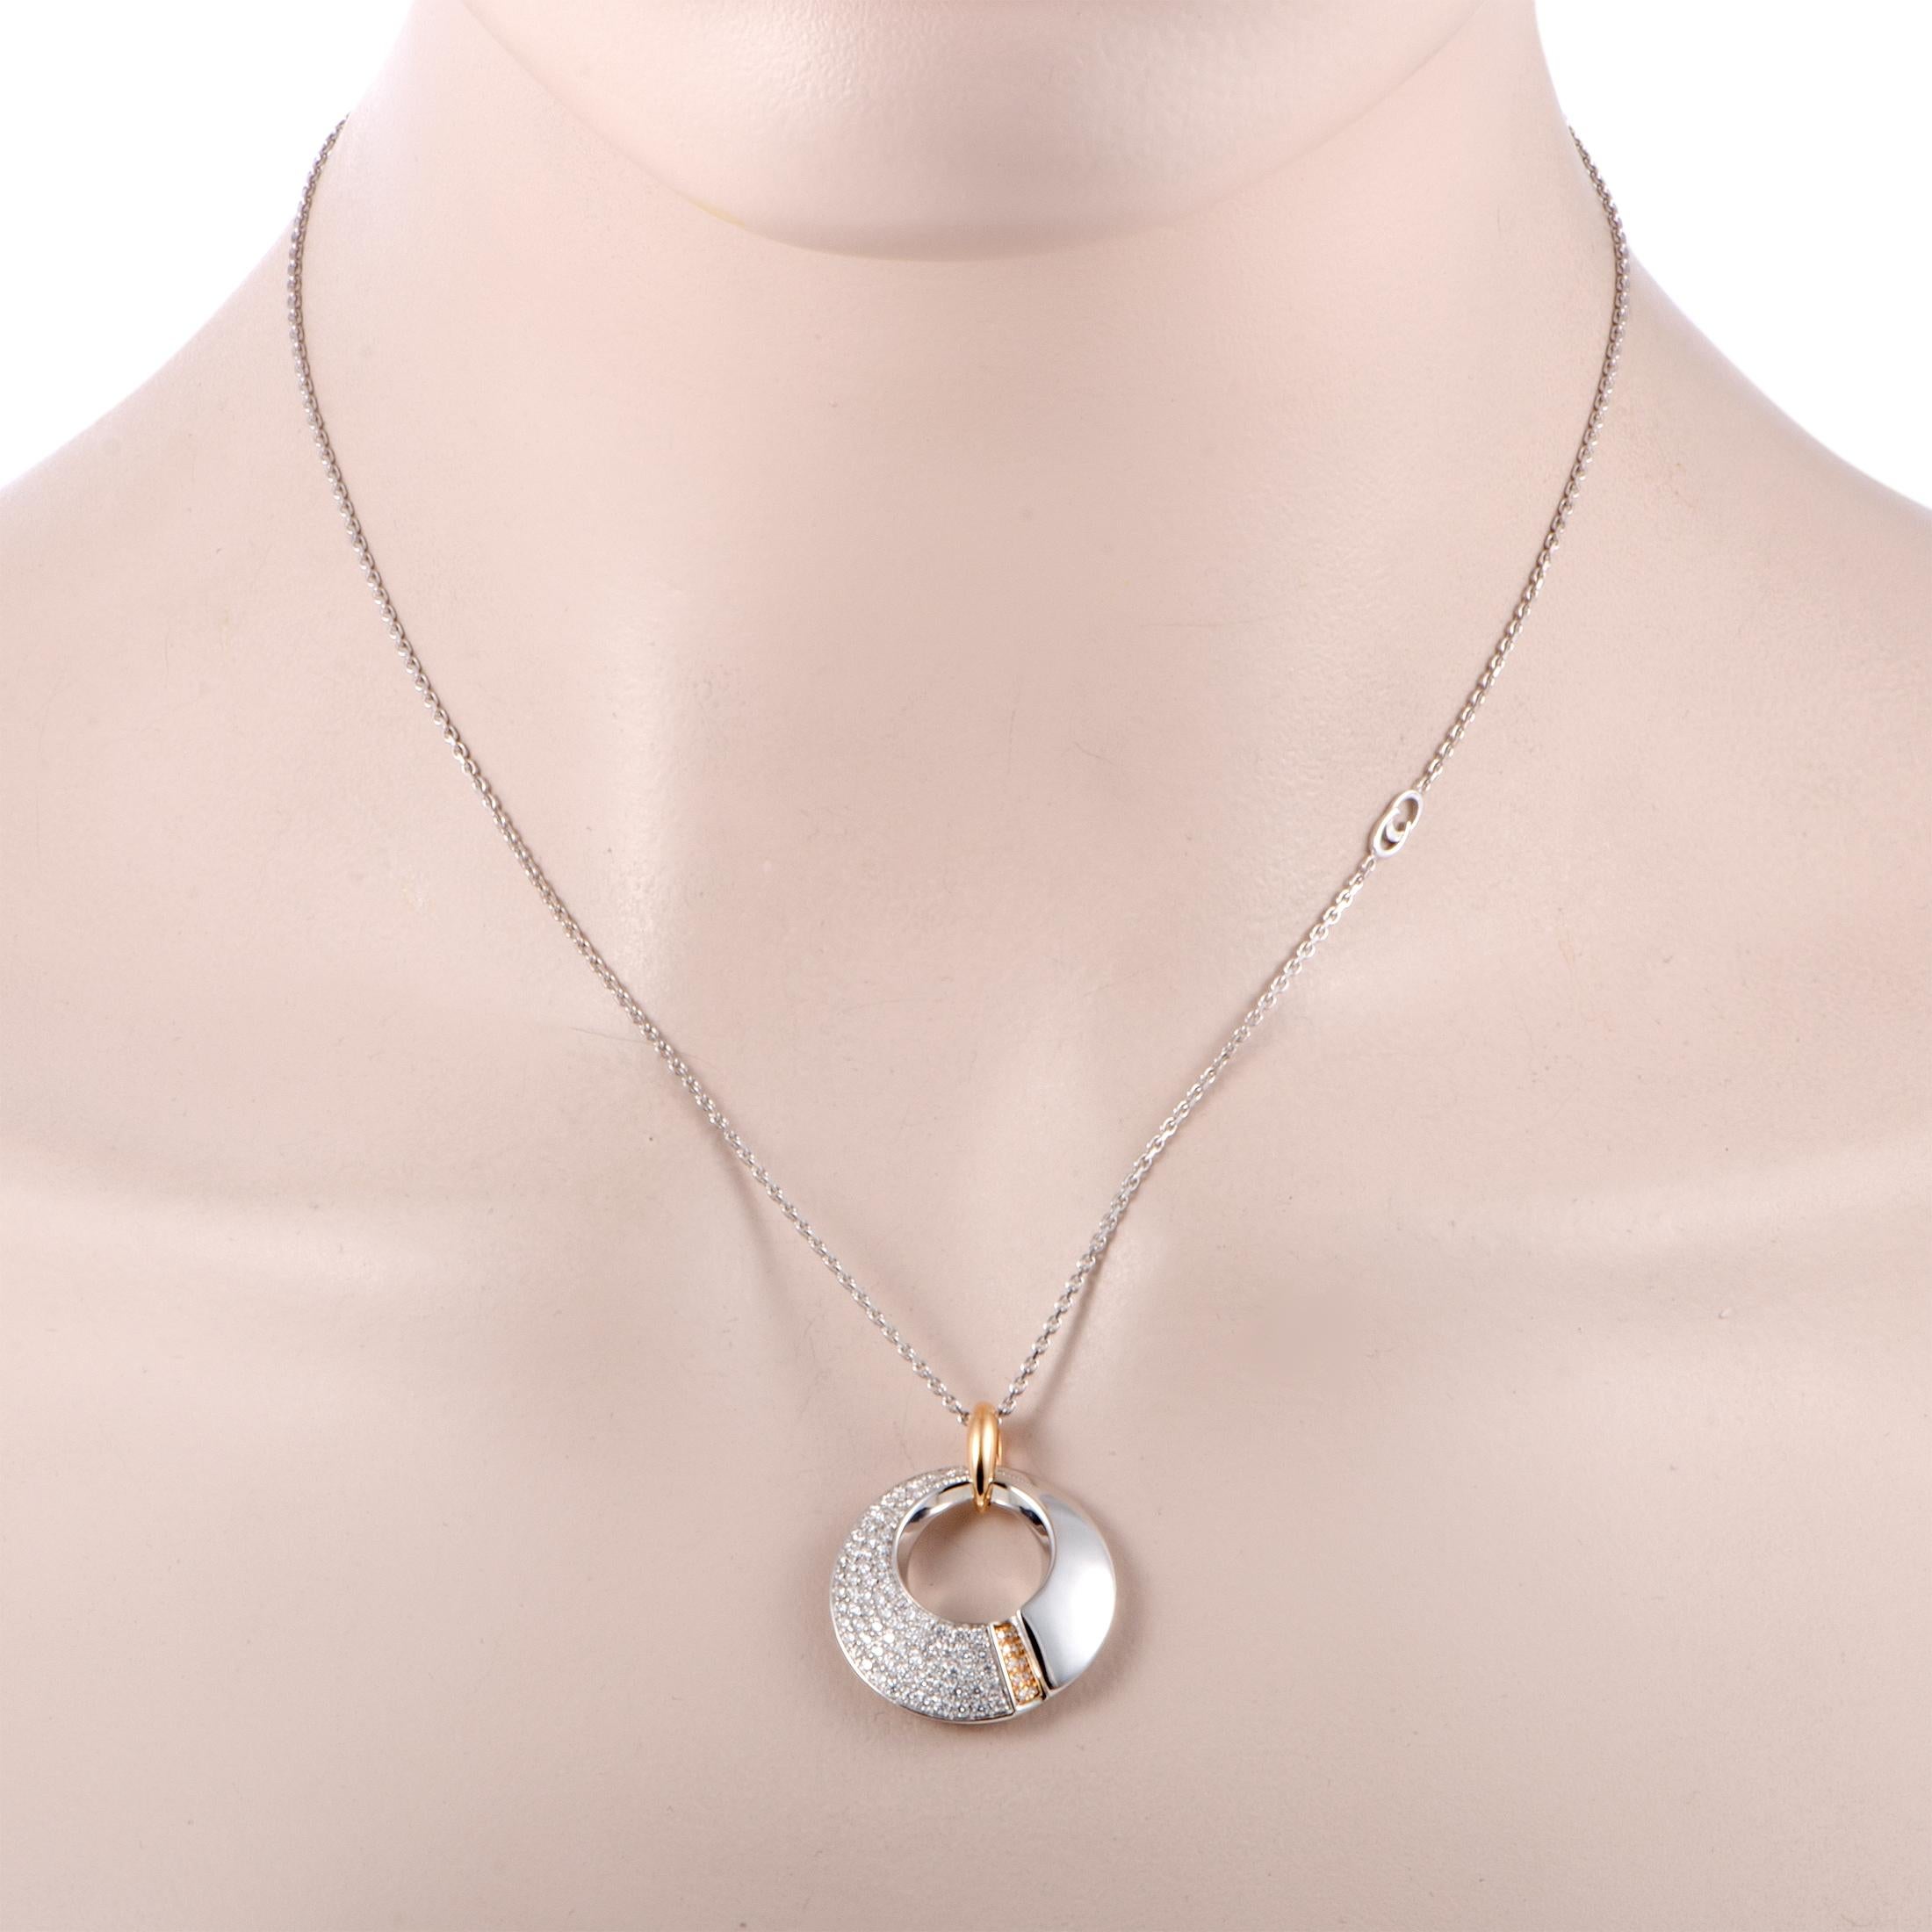 The dainty inserts in rose gold beautifully accentuate the overall bright-toned design of this exceptional jewelry piece that will add a nifty touch of sublime elegance to your look. Presented by Chimento, this necklace is masterfully crafted from